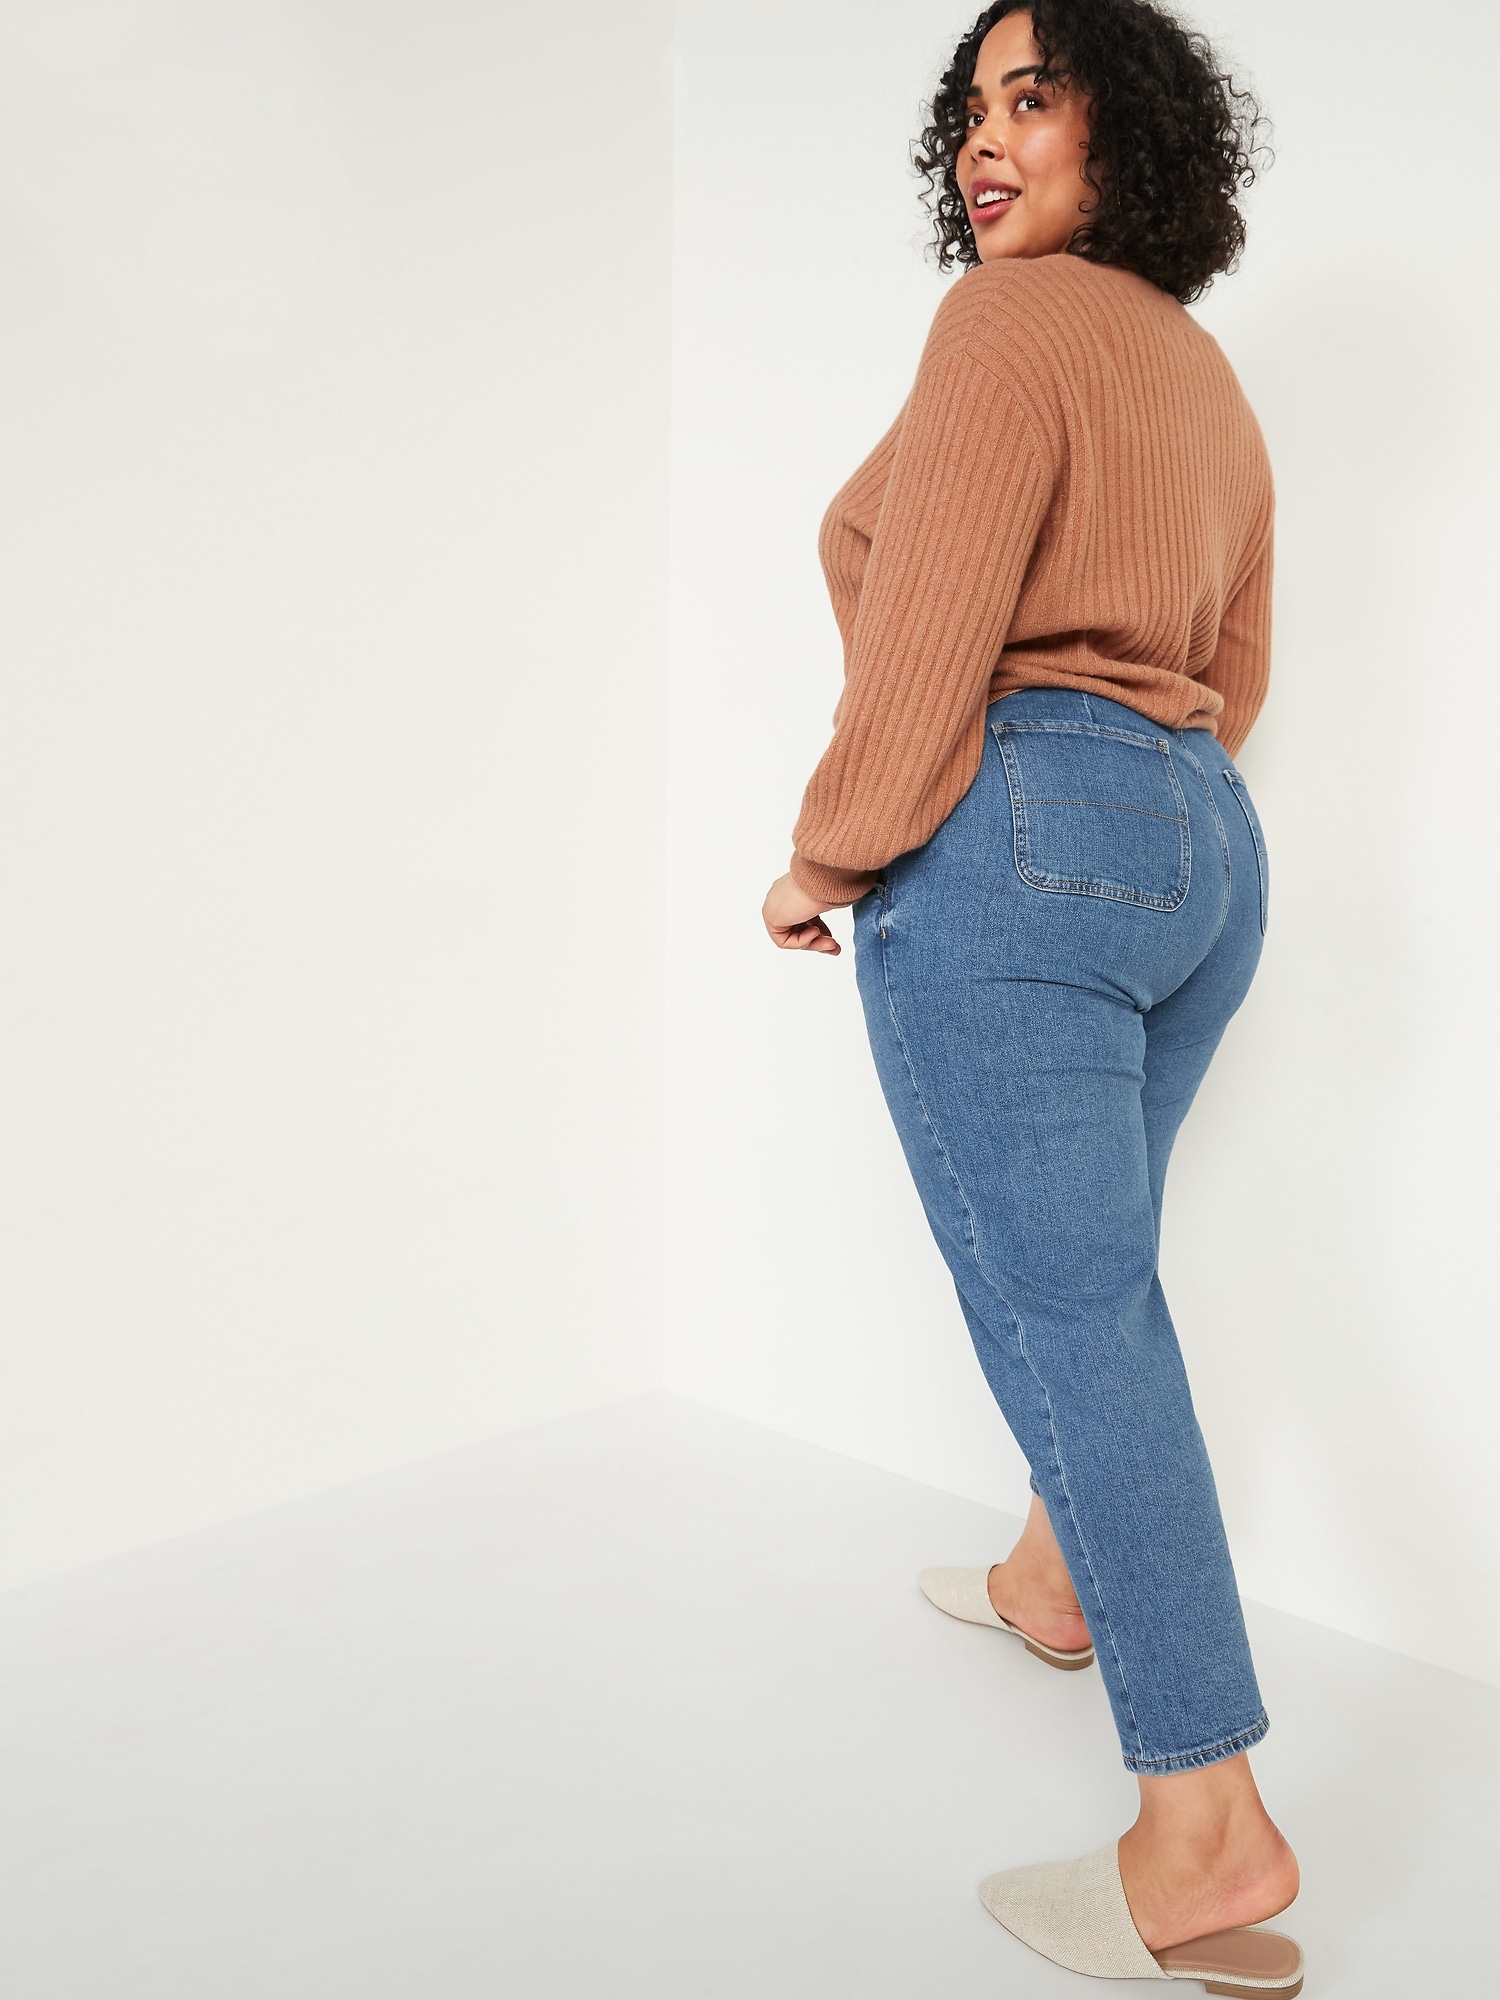 Extra High-Waisted Secret-Slim Pockets Sky-Hi Straight Plus-Size  Non-Stretch Jeans, Old Navy